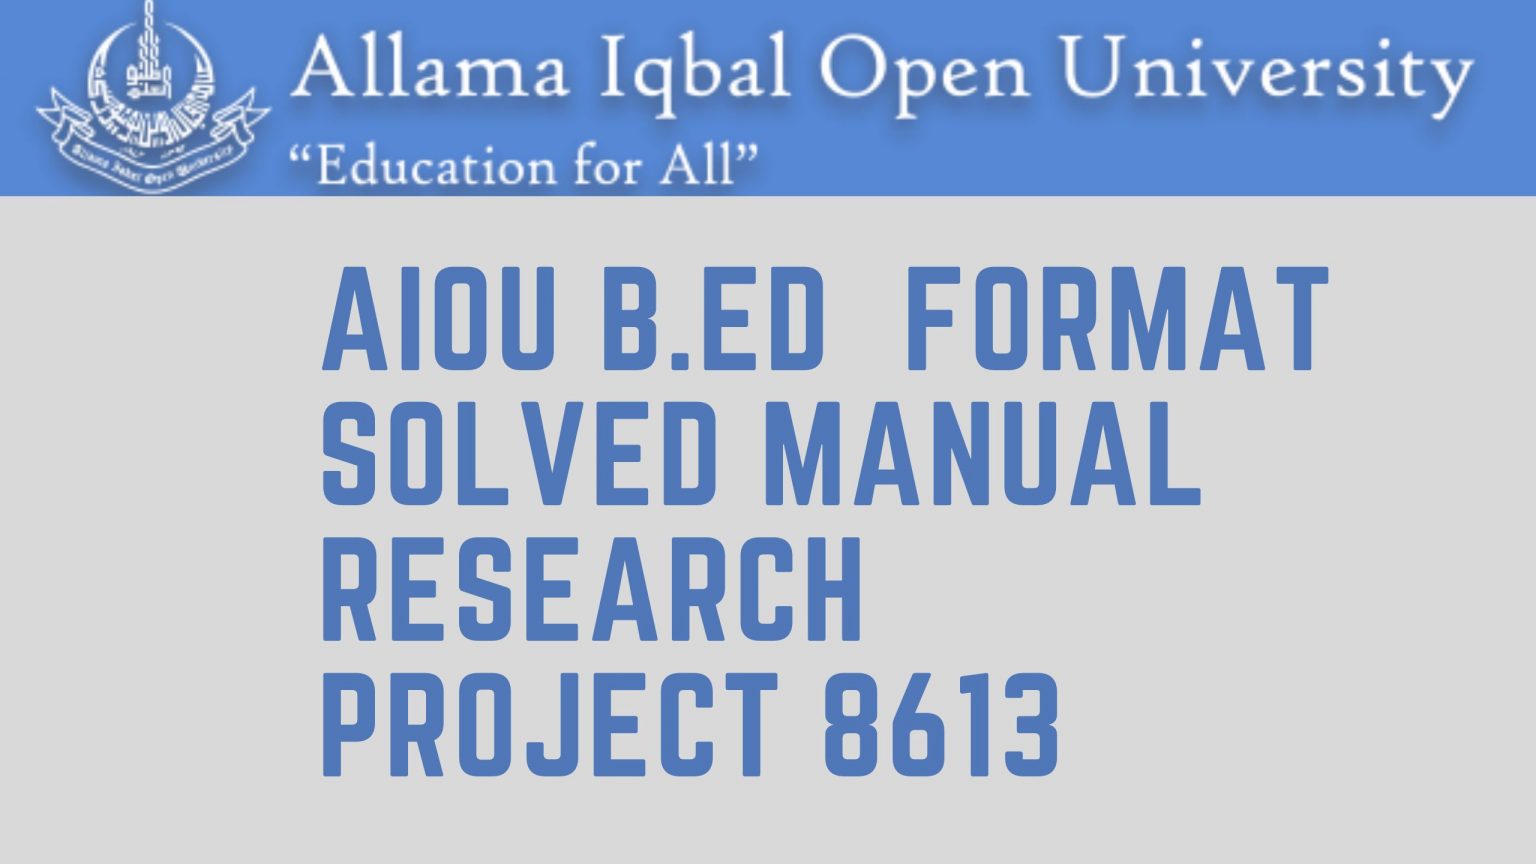 8613 research project aiou